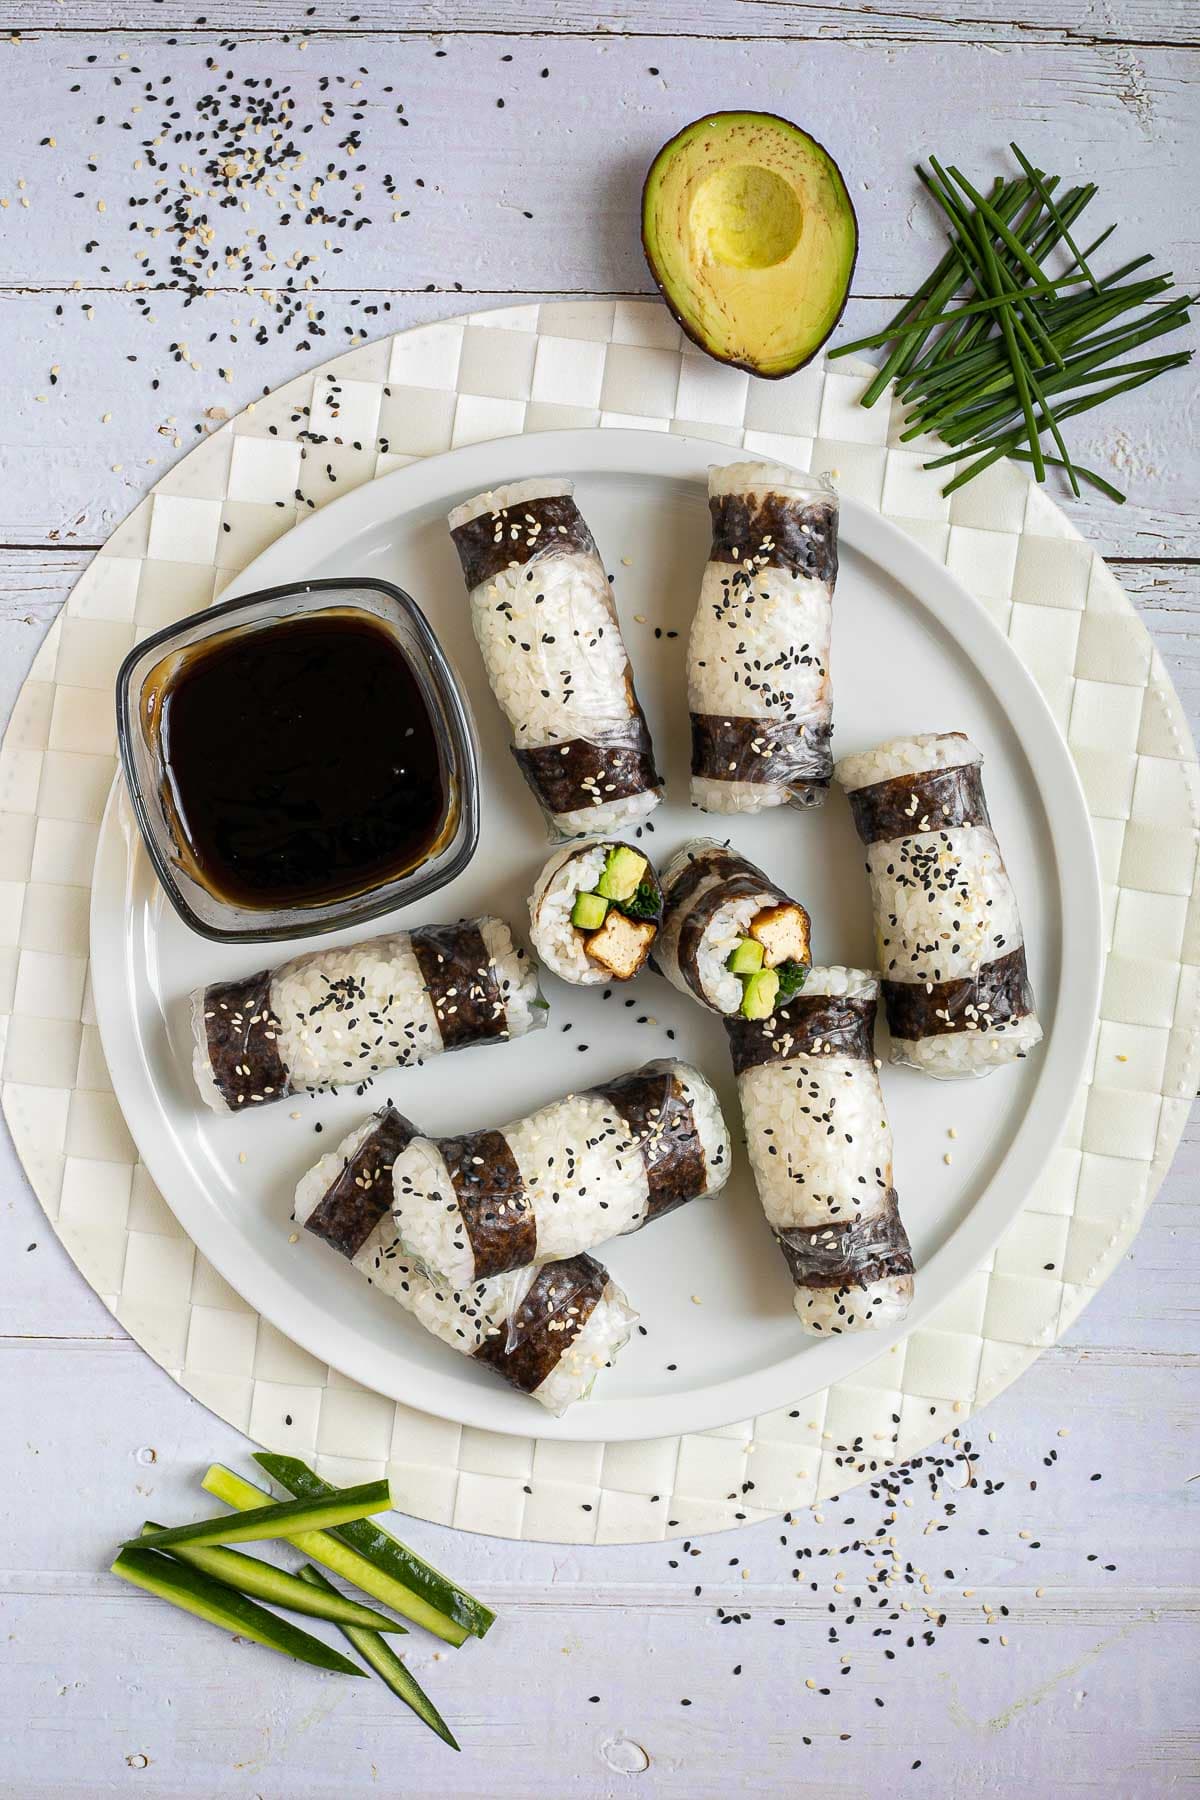 Black and white rice paper rolls on a large white plate sprinkled with black and white sesame seeds. One is cut in the middle so the filling of tofu sticks, cucumber, avocado, and chives is visible.